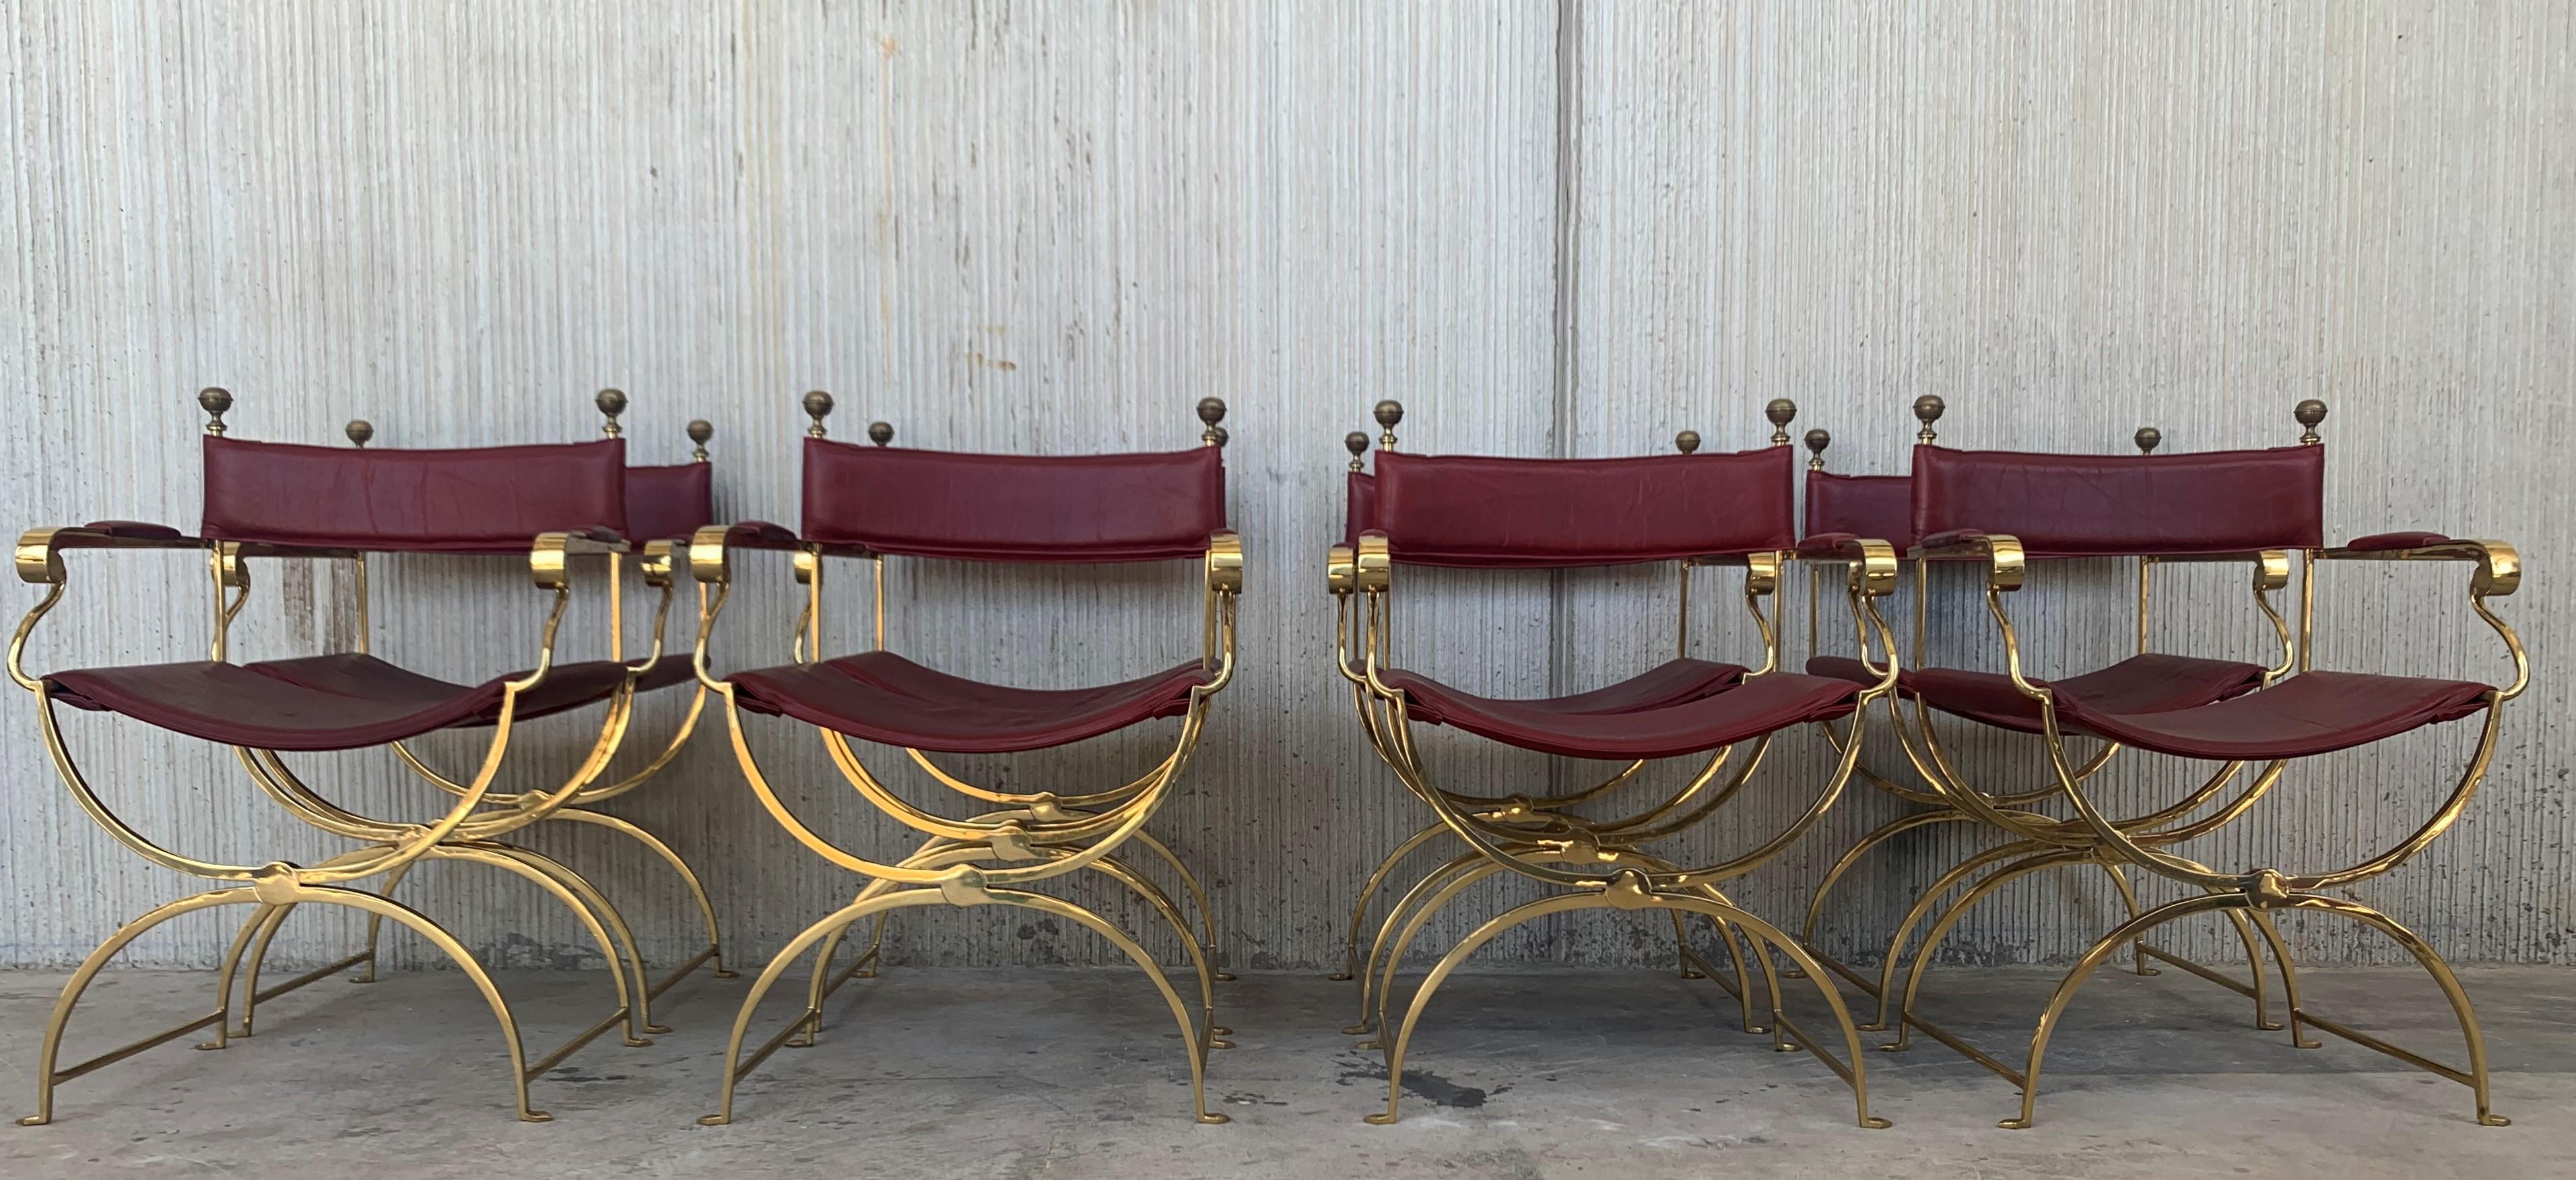 1960s Italian Hollywood Regency Chrome and Leather Savonarola Director's Chairs For Sale 3